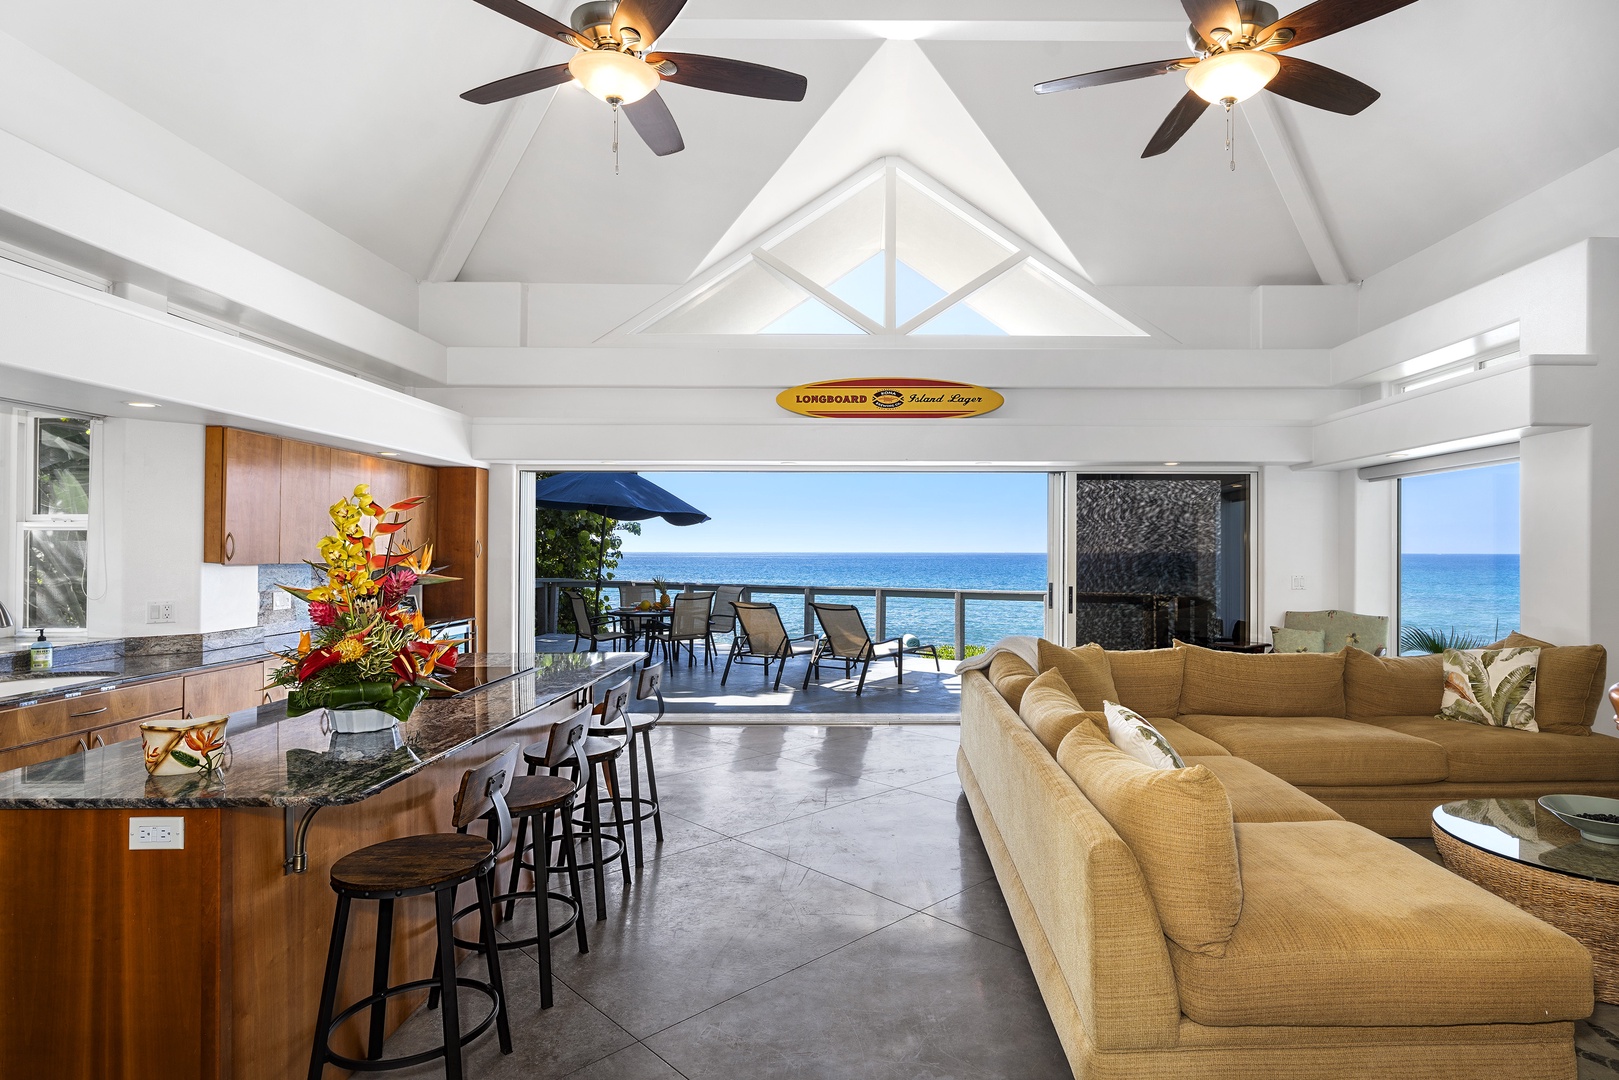 Kailua-Kona Vacation Rentals, Hale Kope Kai - With the vaulted ceiling the property is both spacious and cozy